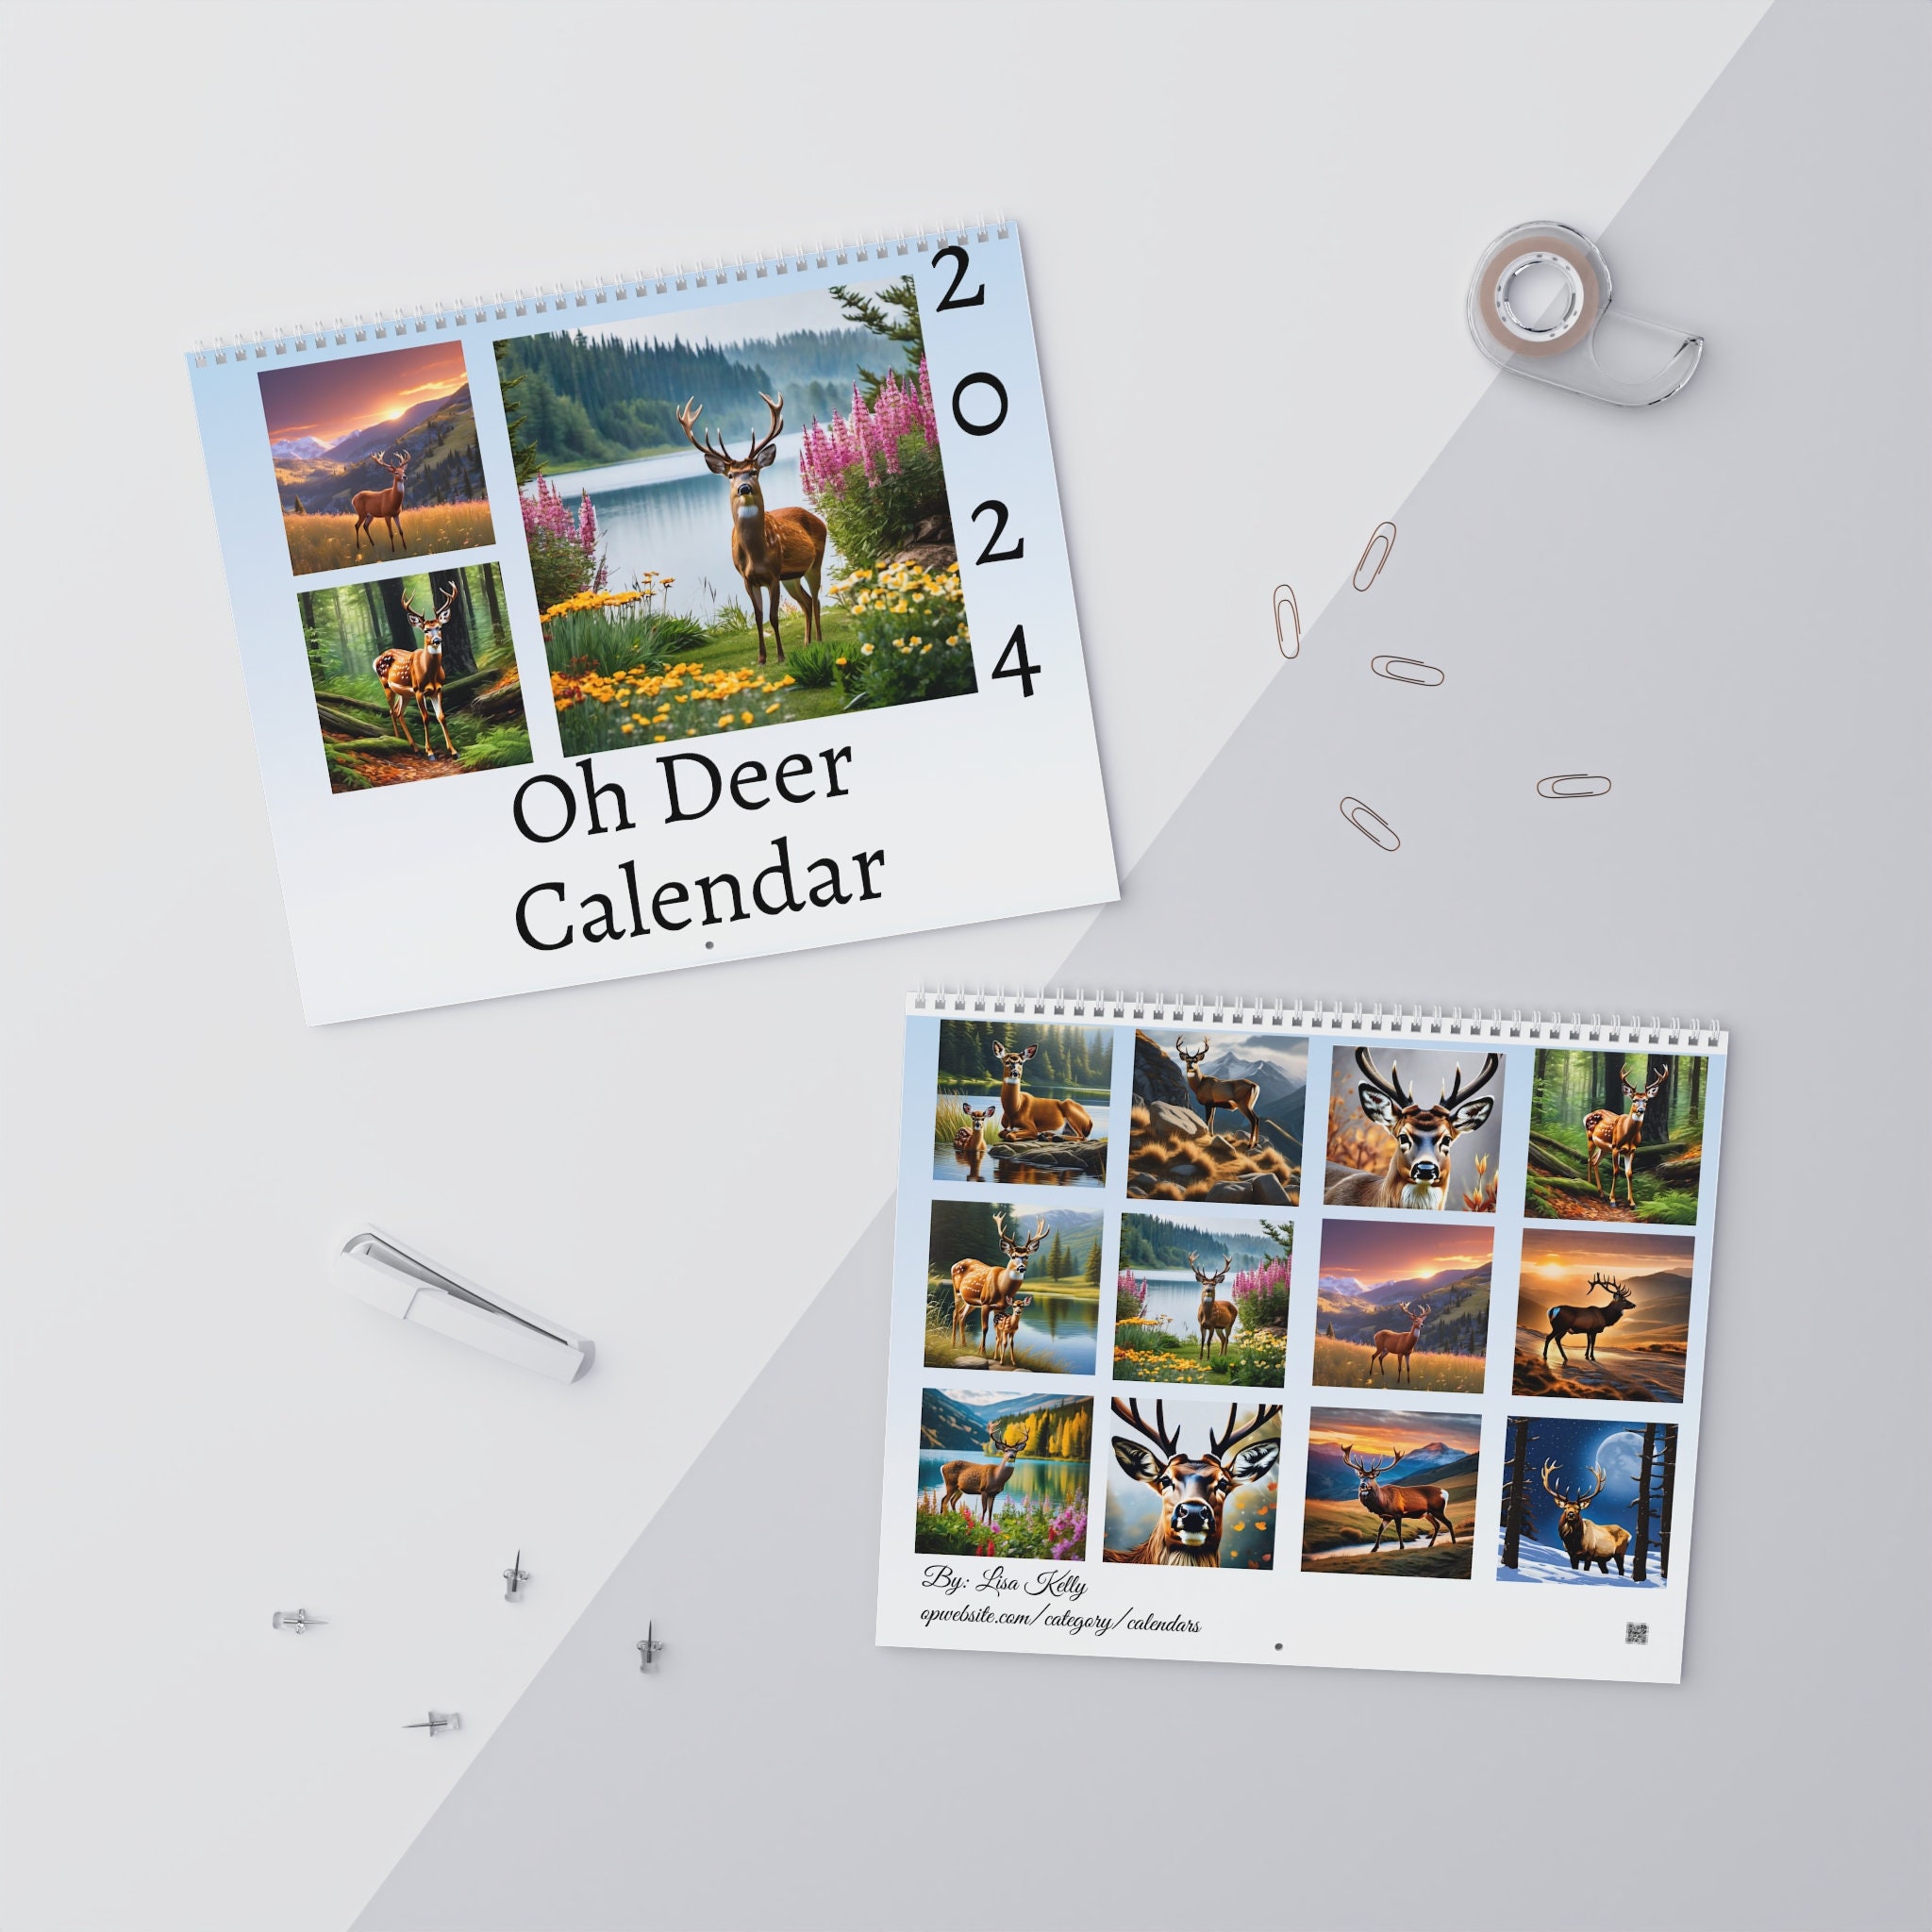 The most beautiful calendars for any occasion